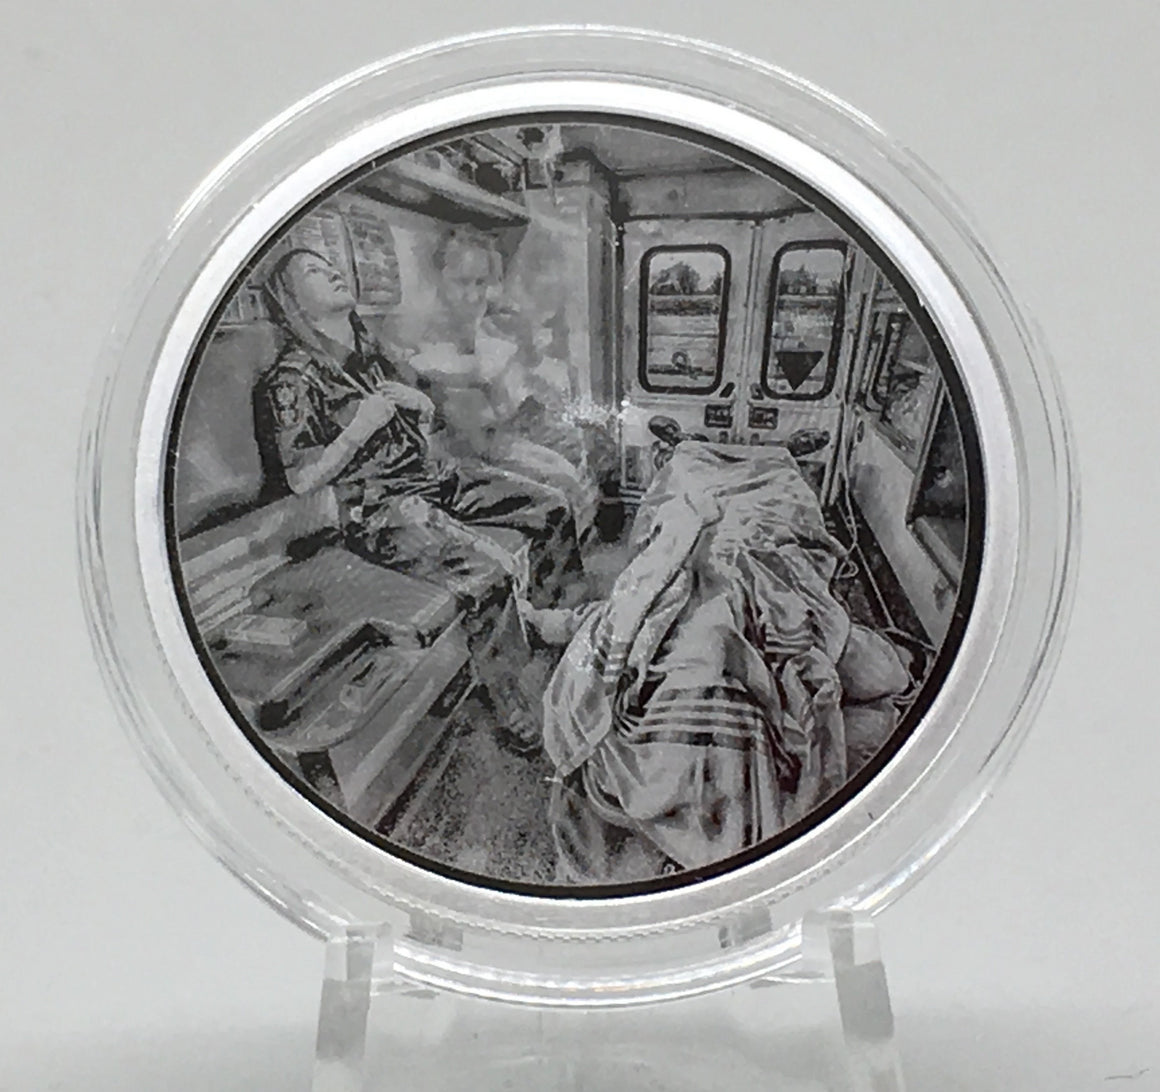 Non Save - Wounded Healers, 1oz .999 Fine Silver Round by Pheli Mint